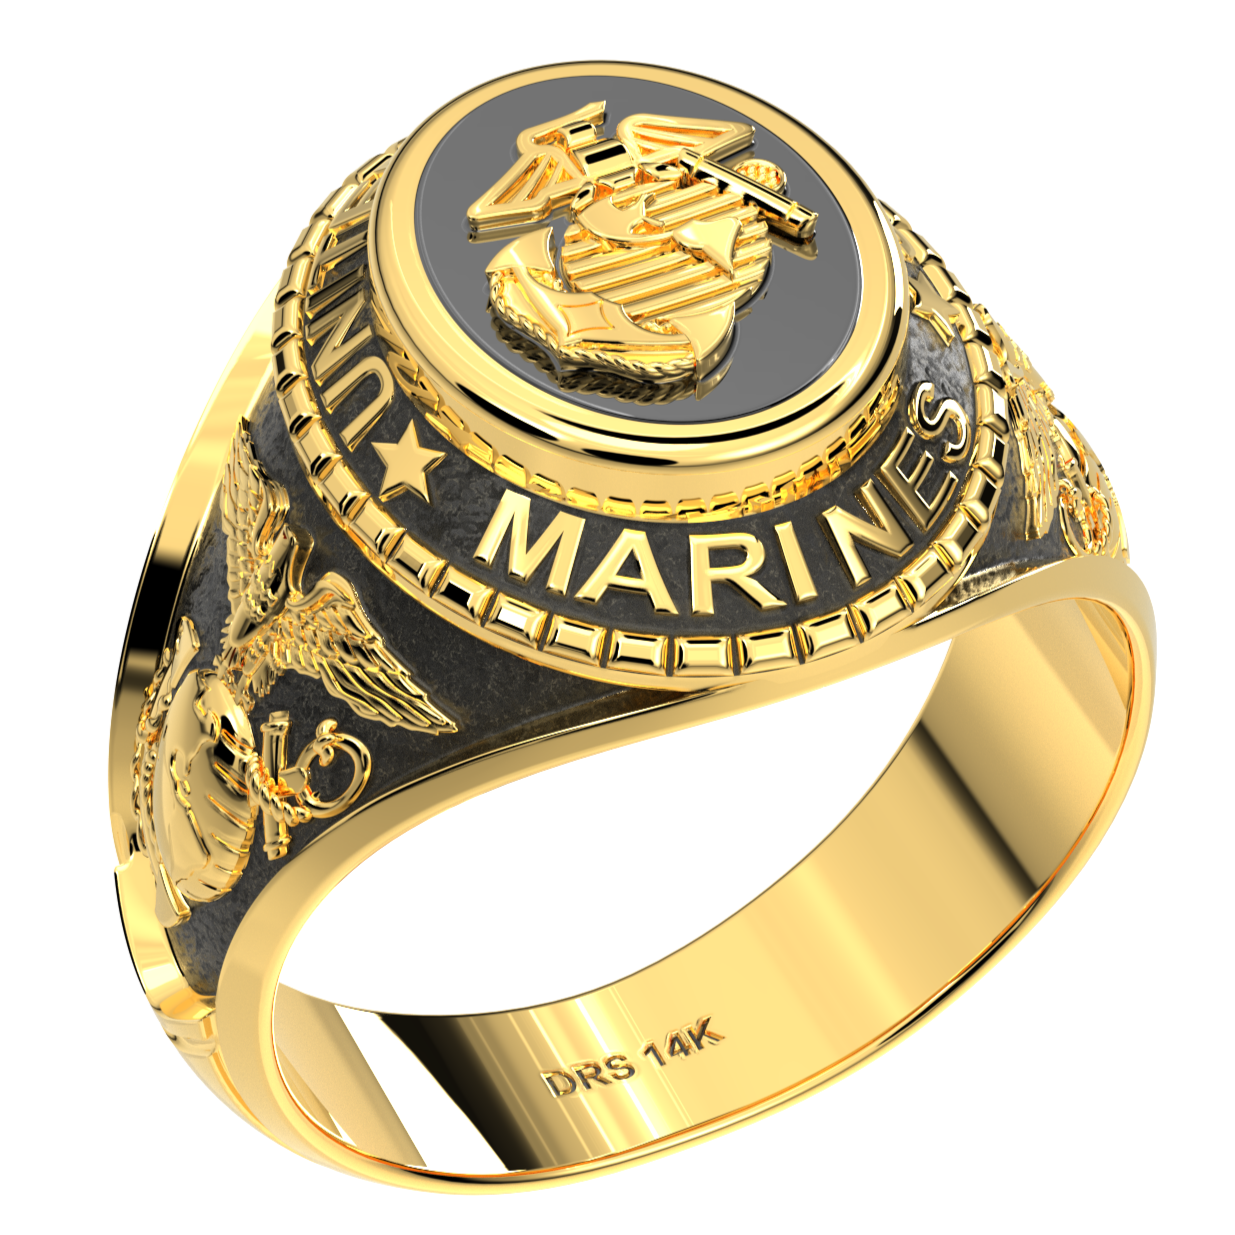 Customizable Men's Antiqued 14k Yellow or White Gold United States Marine Corps Military Solid Back Ring